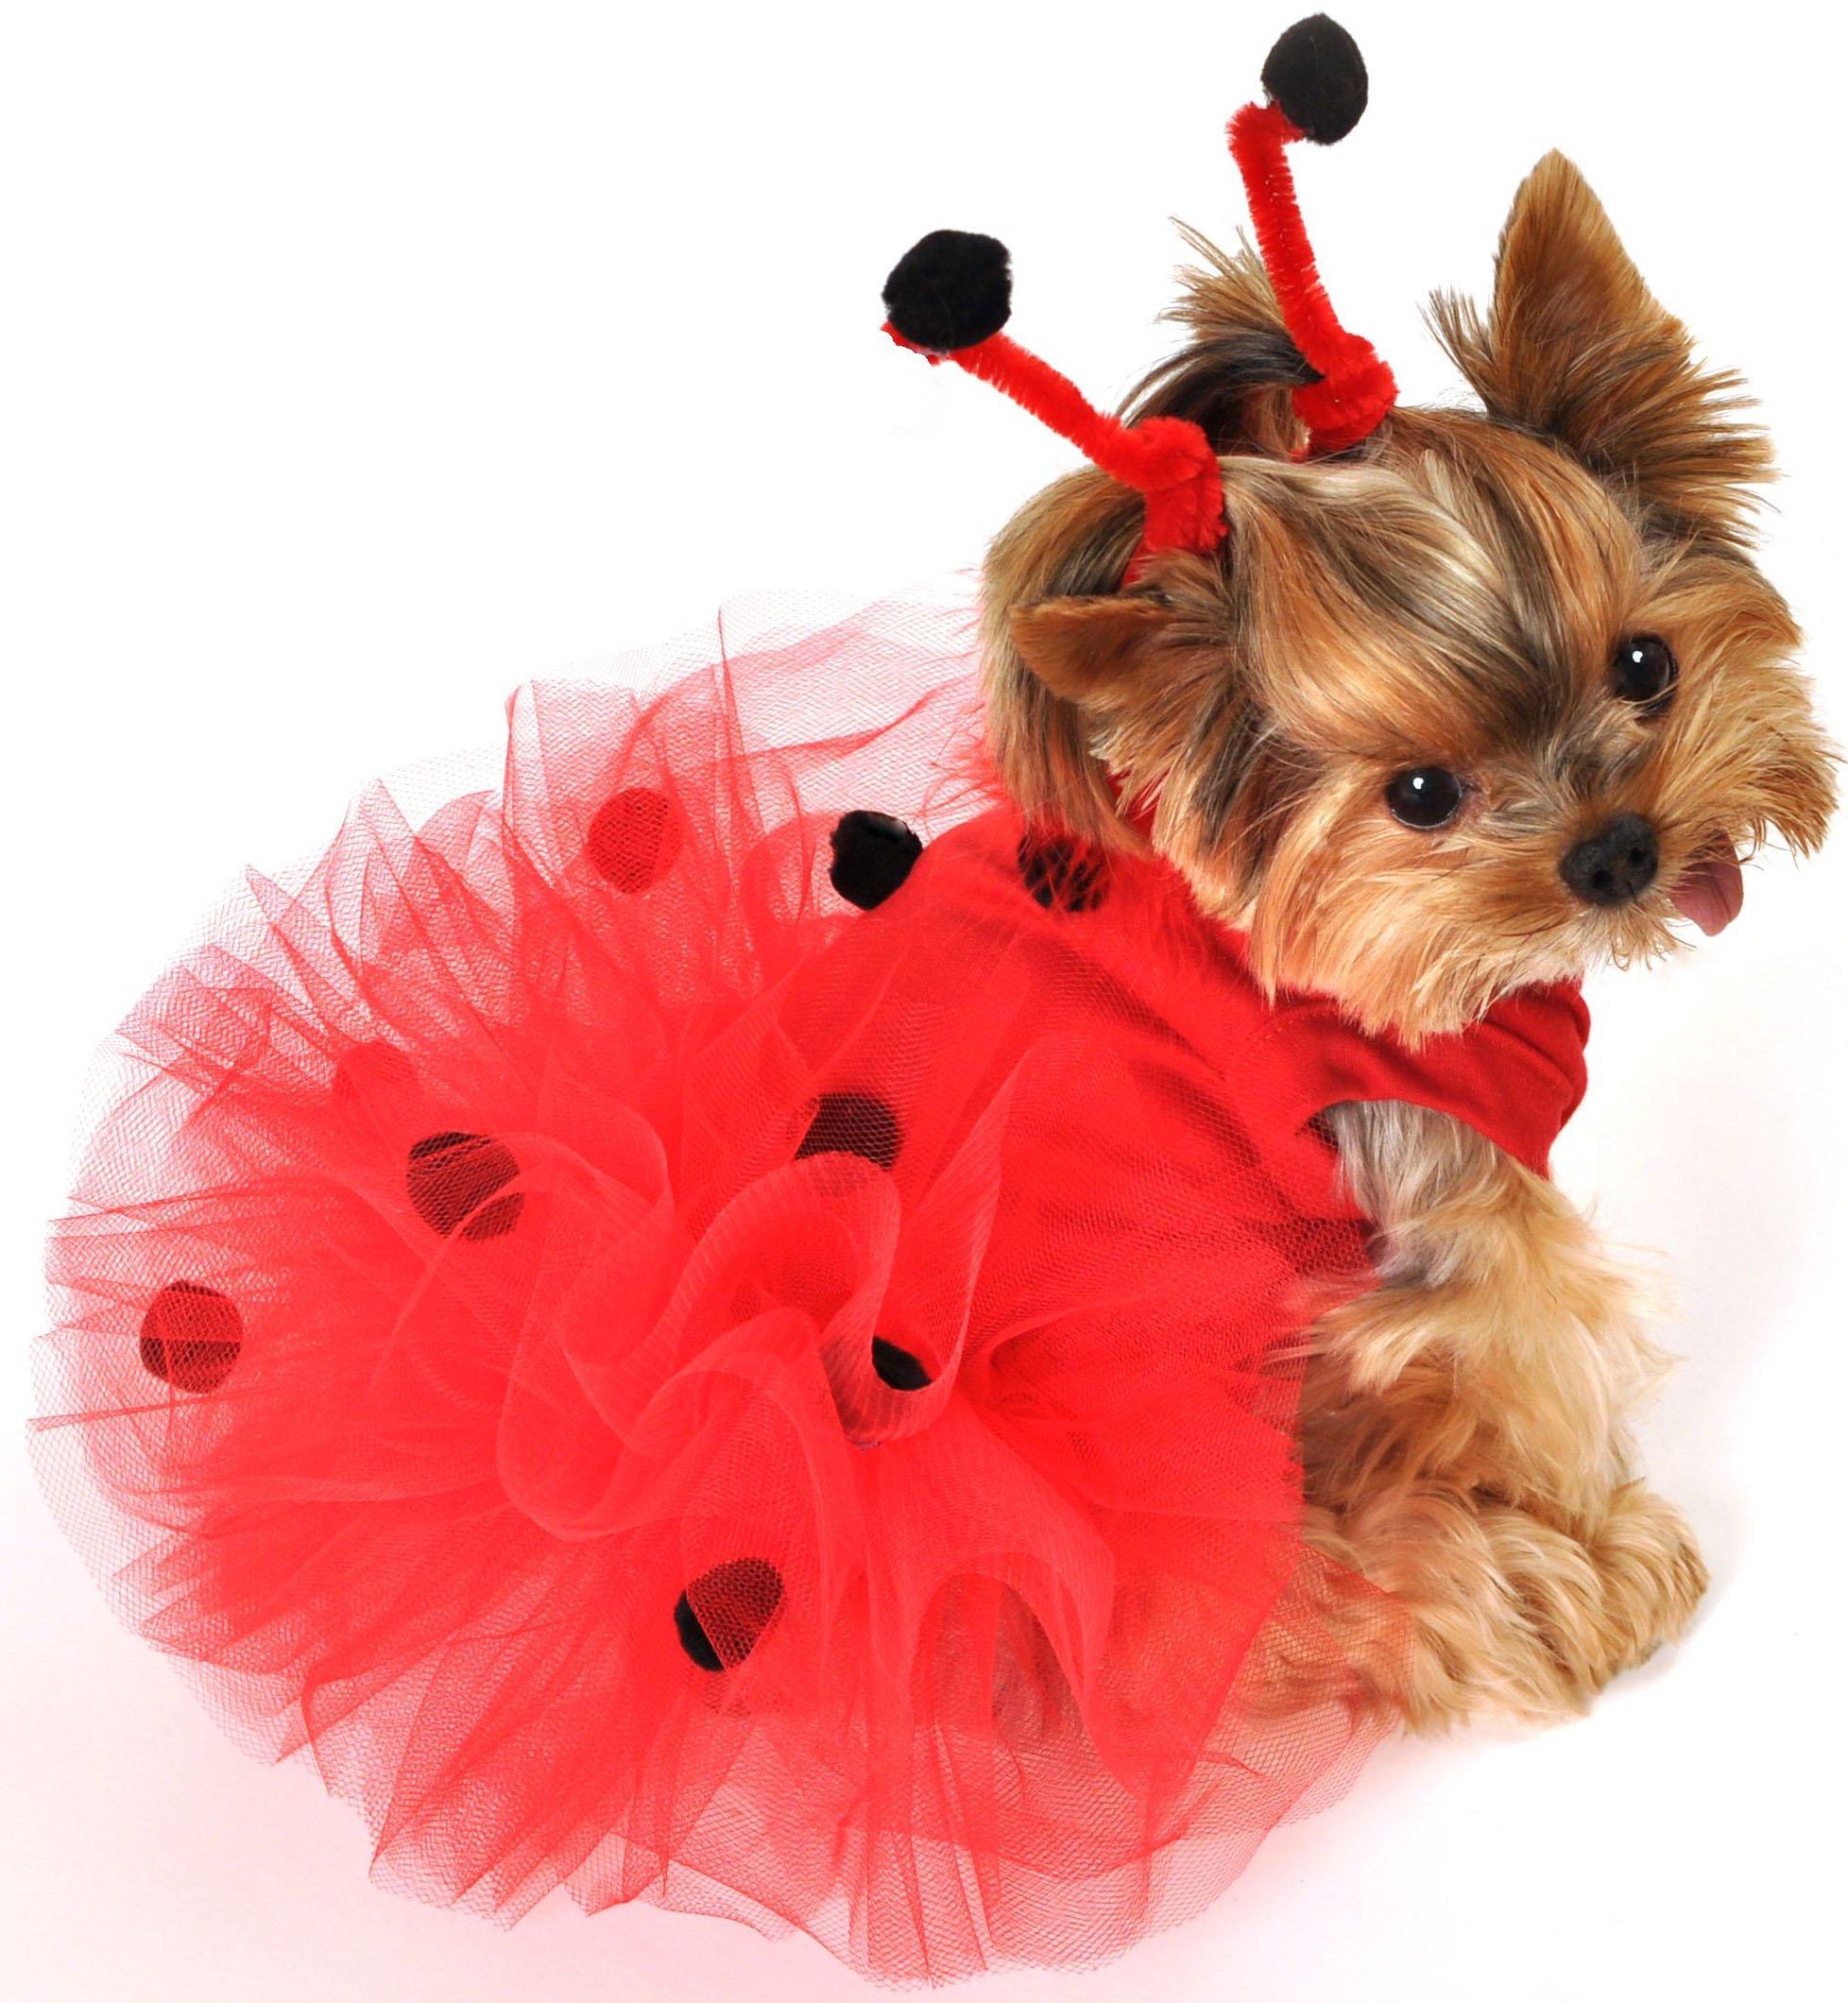 35 Fun Pet Costumes For Halloween To Be Your Best Partner